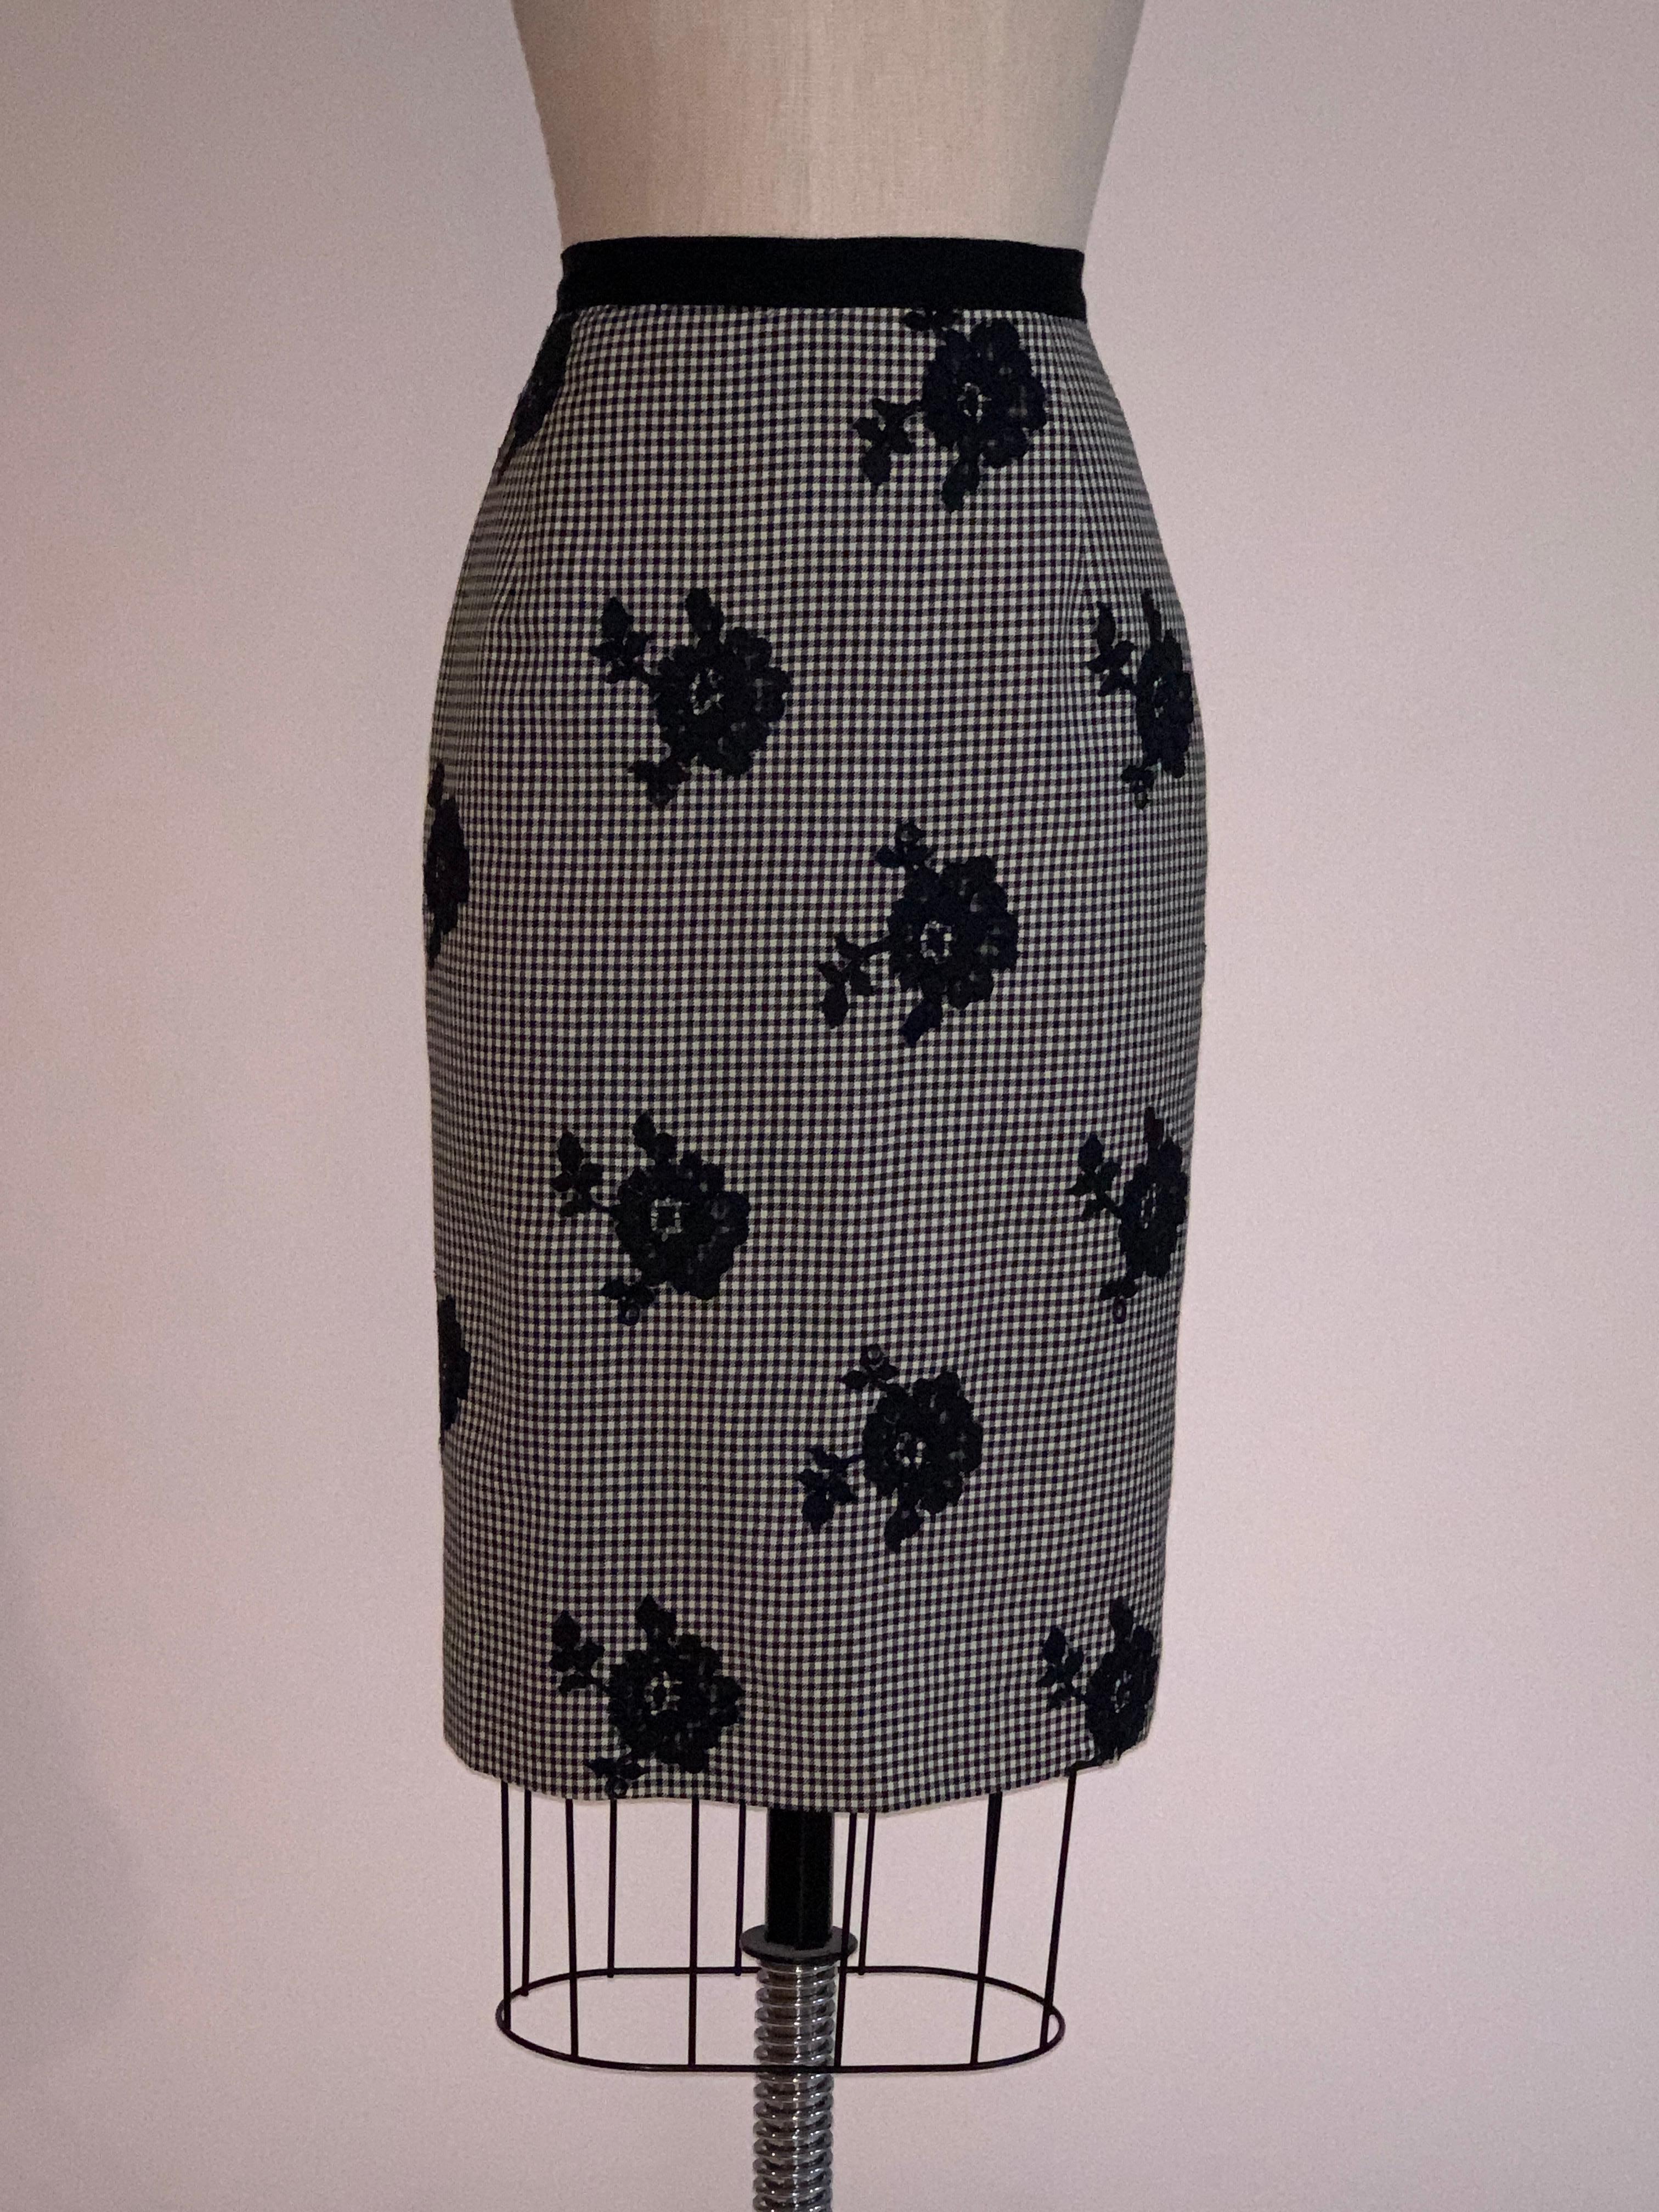 Oscar de la Renta black and white check pencil skirt with black lace floral accents throughout. Grosgrain band at waist. Back zip with hook and snap closure. Part of Look 6 from the Resort 2014 presentation. 

64% wool, 21% silk, 15% linen.

Made in